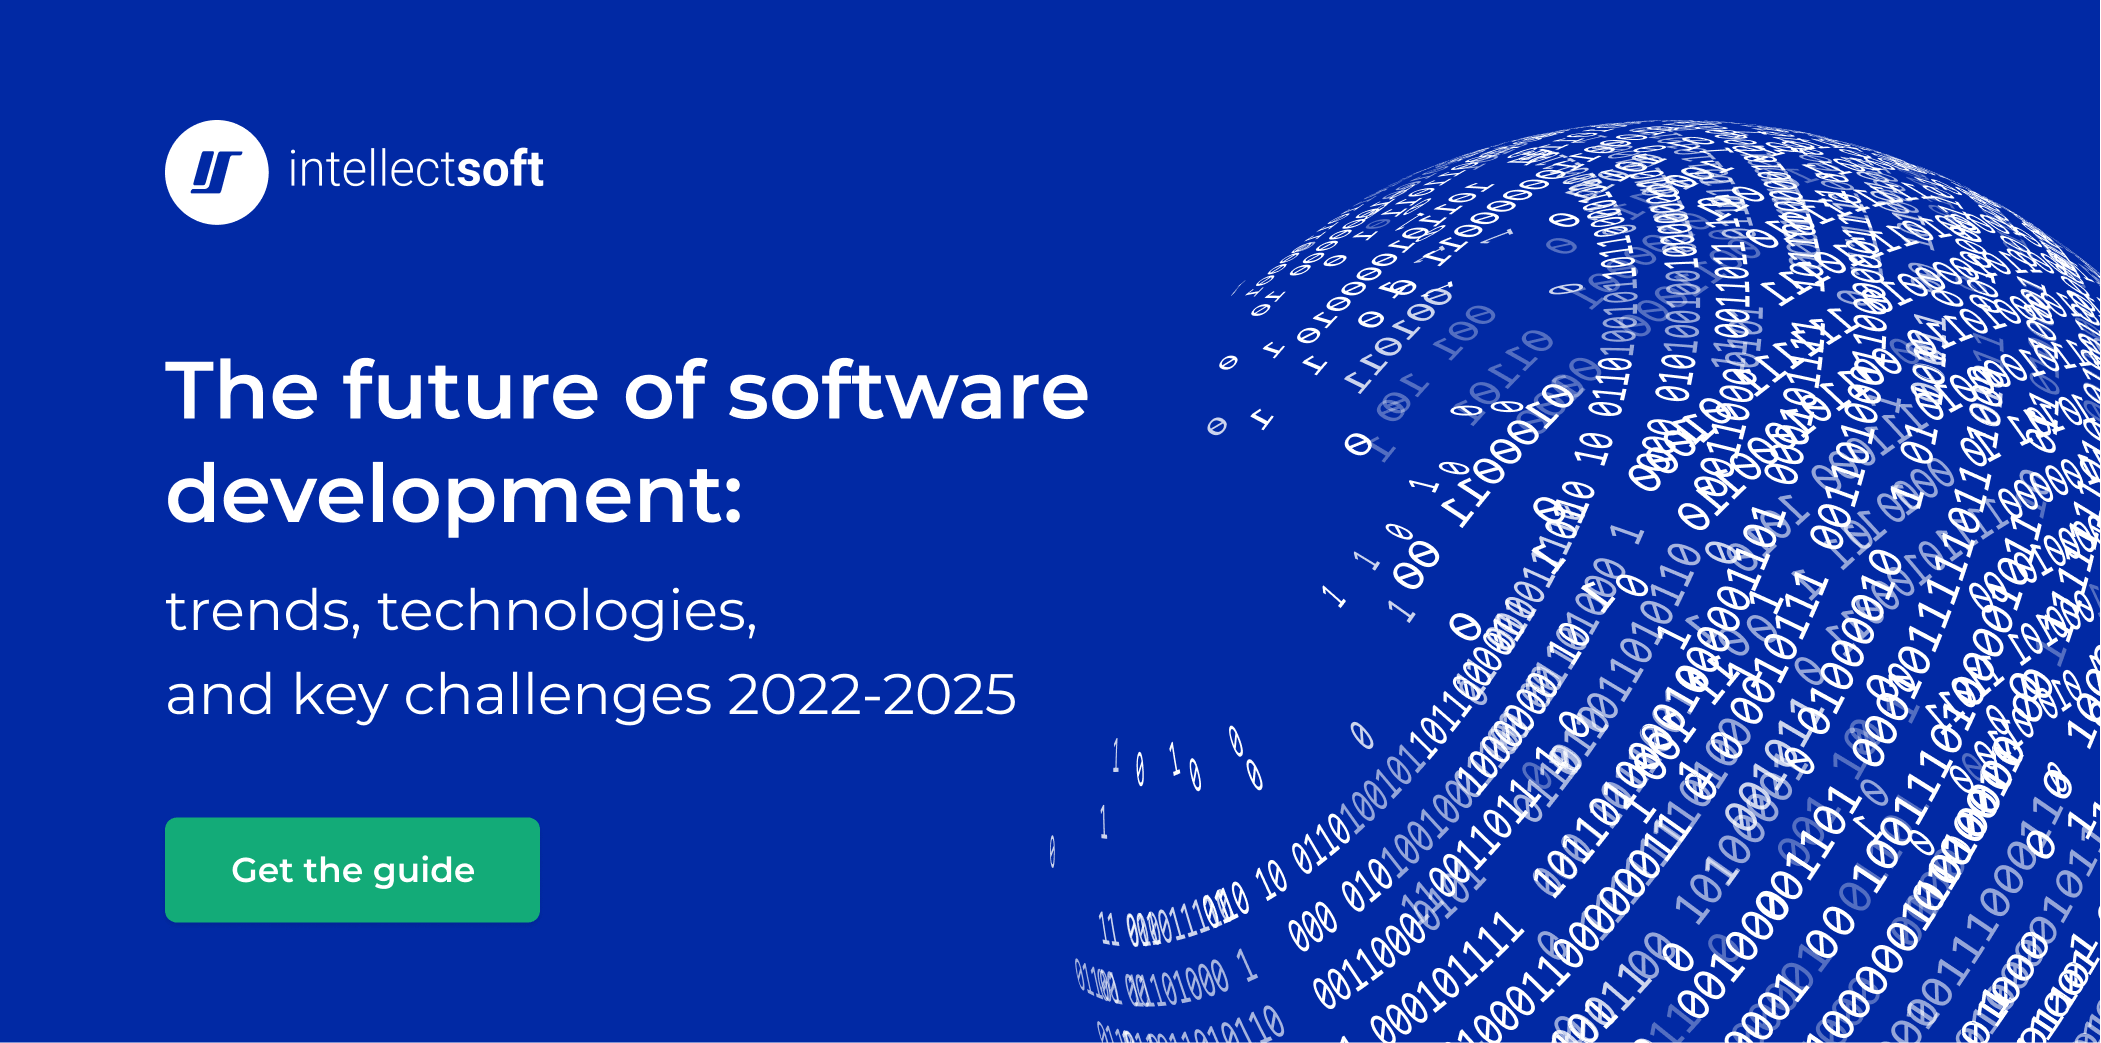 The Future of Software Development Trends, Technologies, and Key